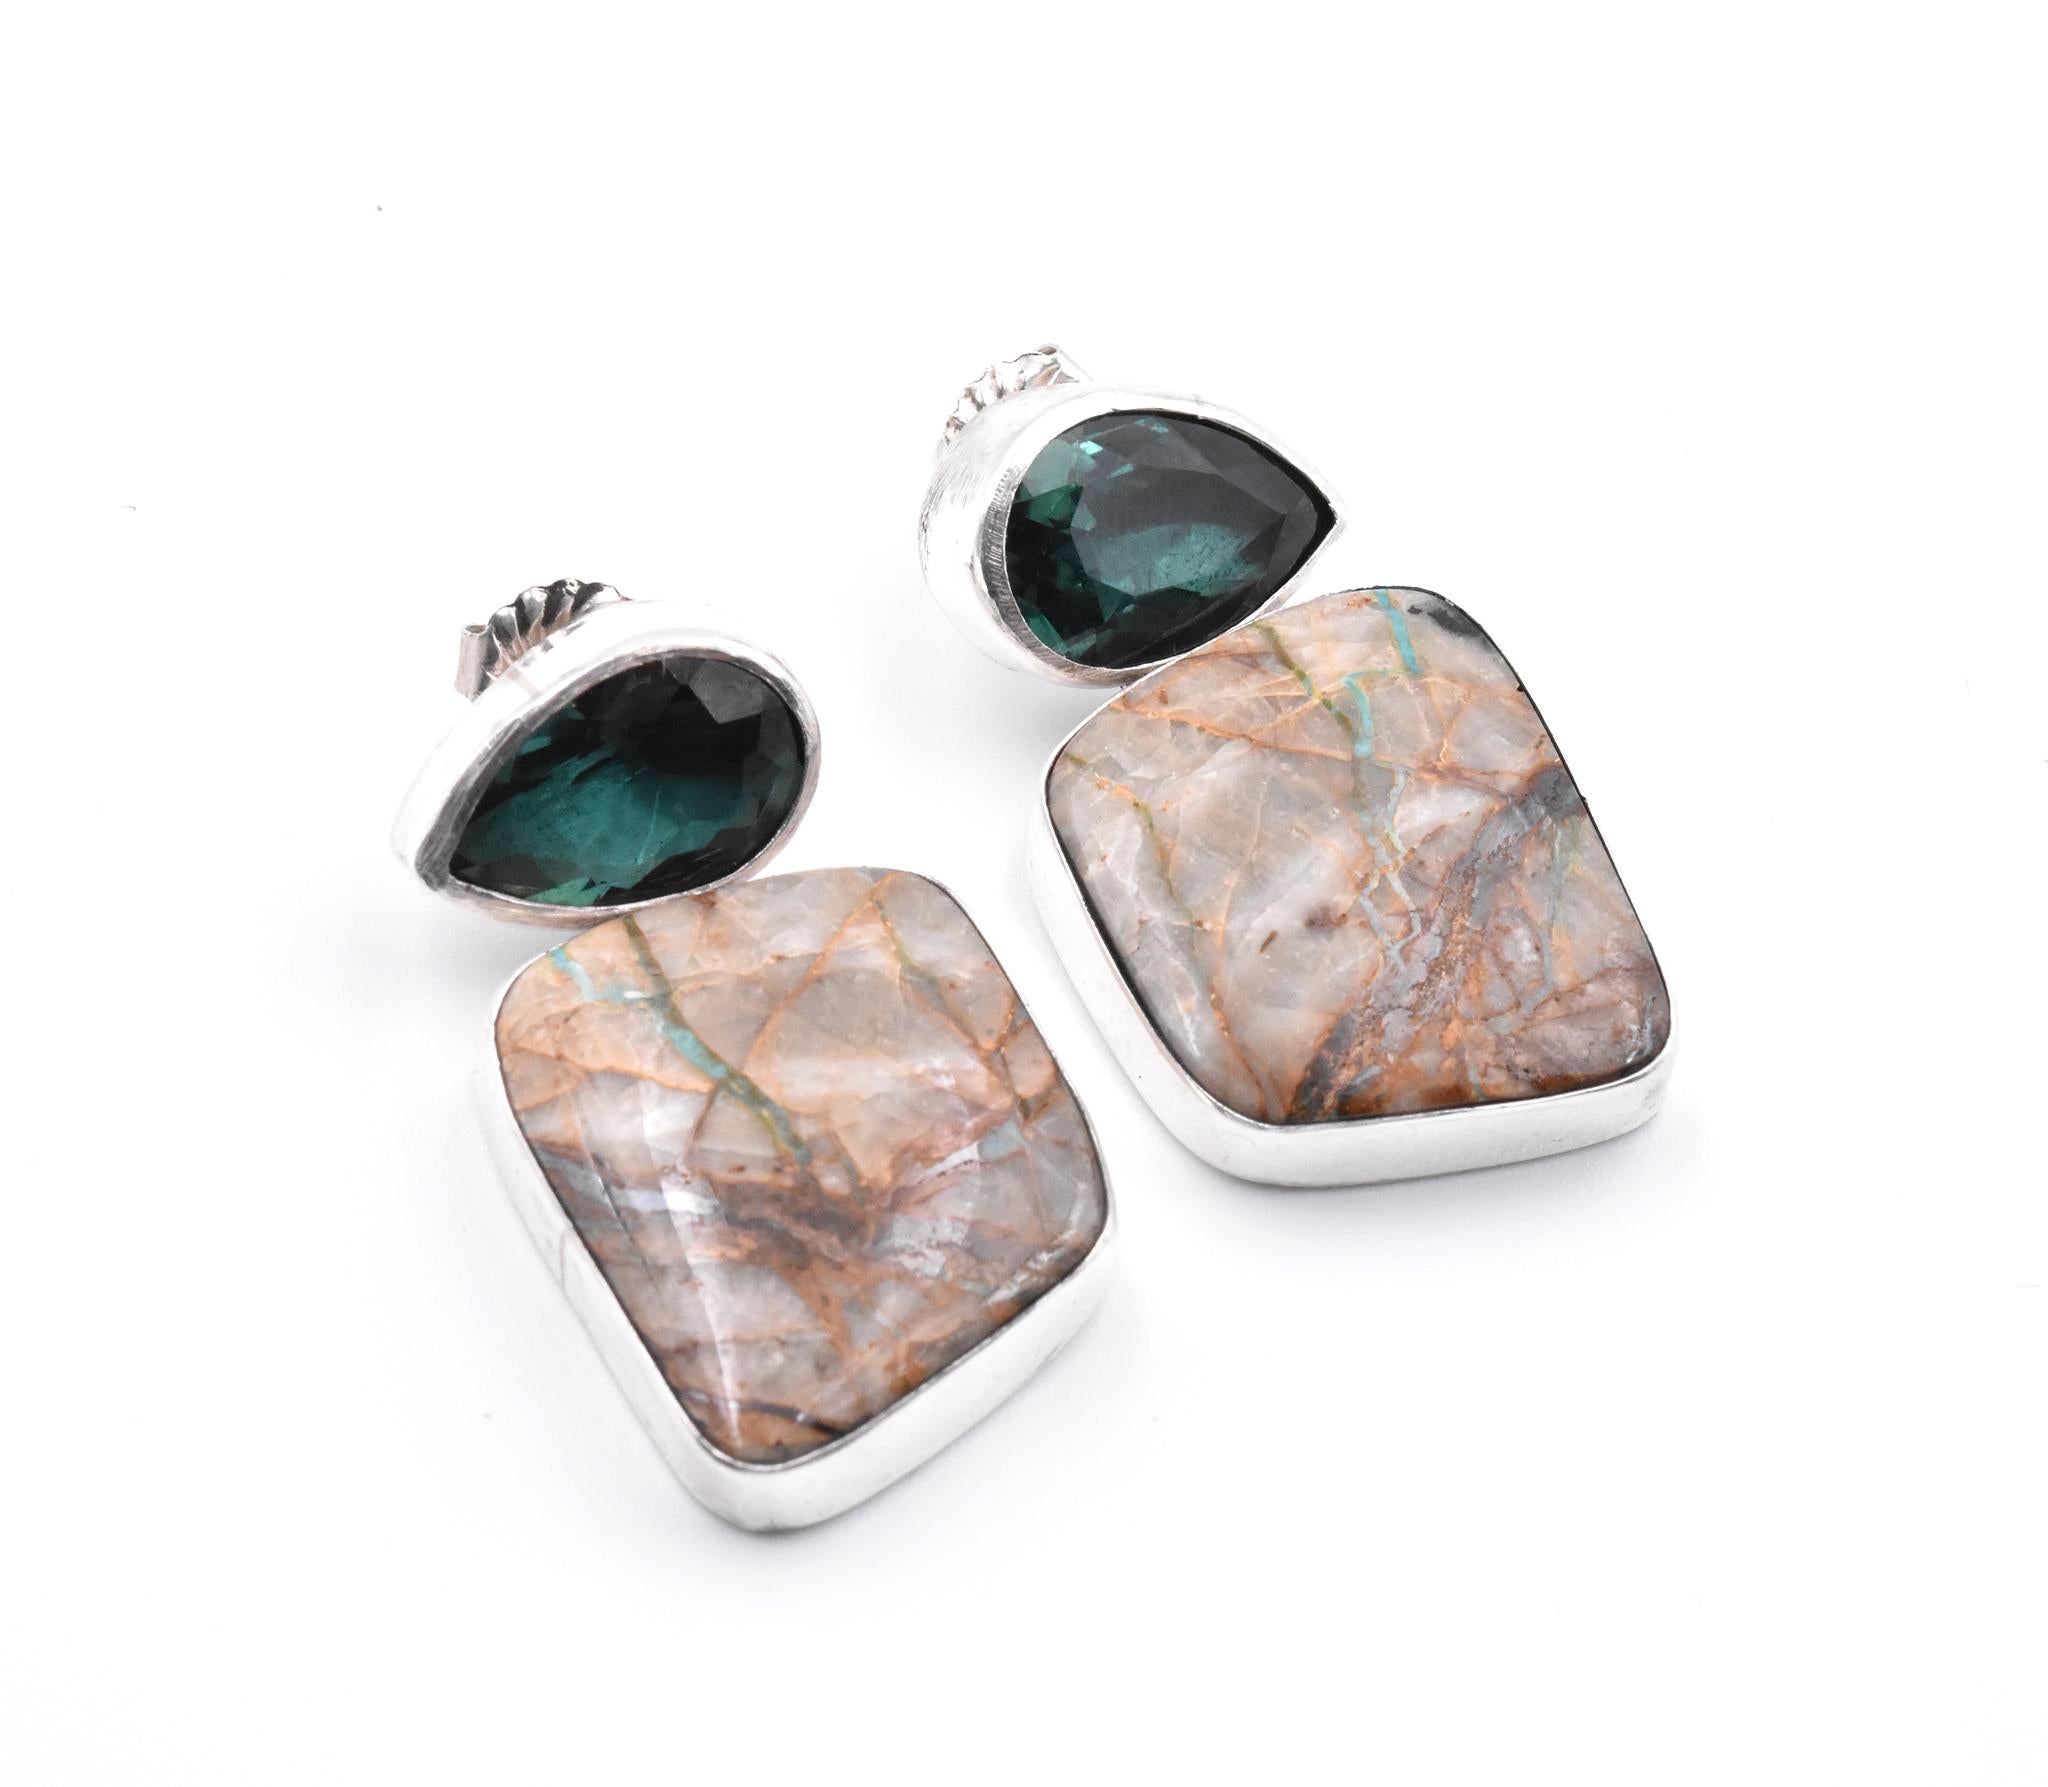 Designer: hallmarked “RD” 
Material: sterling silver
Gemstone: 2 faceted pear cut green quartz; 2 Royston turquoise bezel set below
Dimensions: earrings measure 36.90mm x 19.80mm
Fastenings: post with friction back
Weight: 6.4 grams
